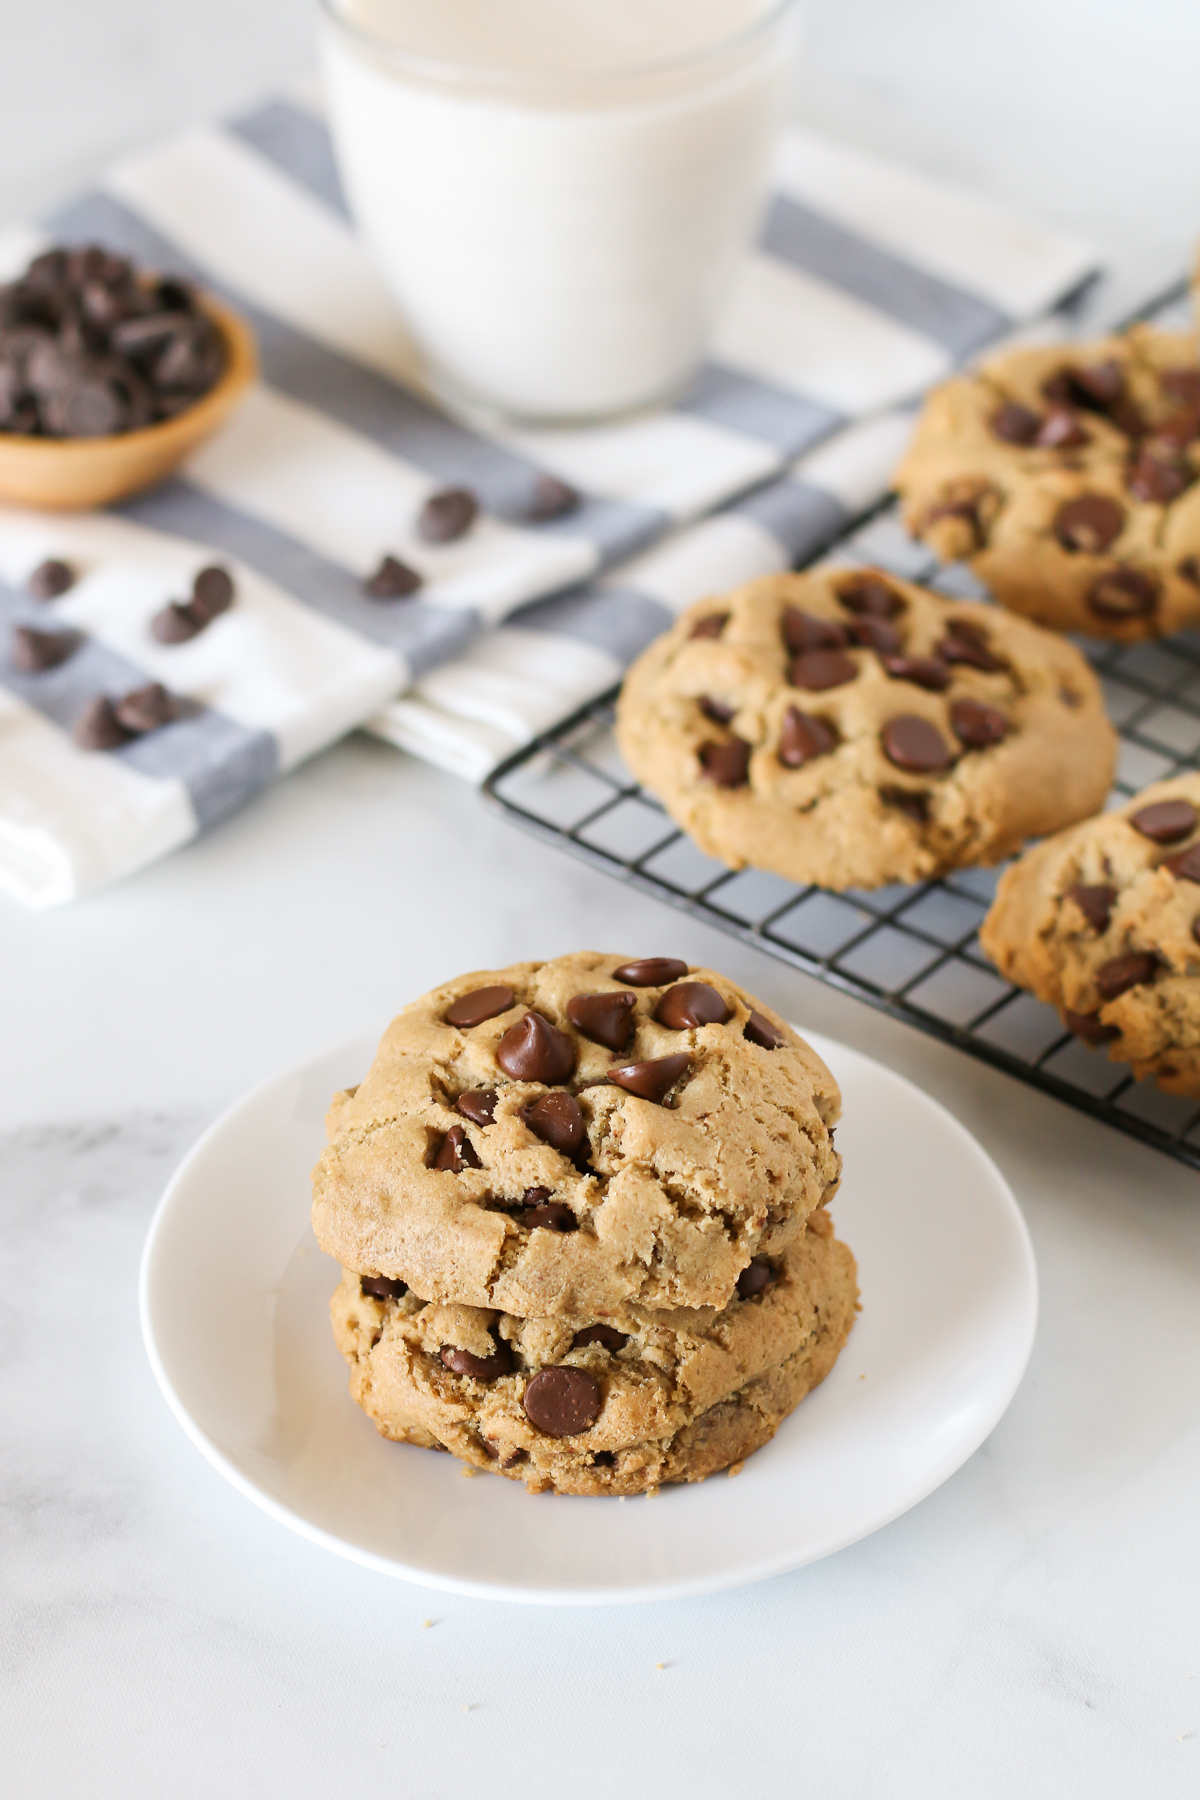 Gluten Free Vegan Big Fat Chocolate Chip Cookies. Loaded with chocolate chips, gooey on the inside and crispy on the edges. Chocolate chip cookie perfection!